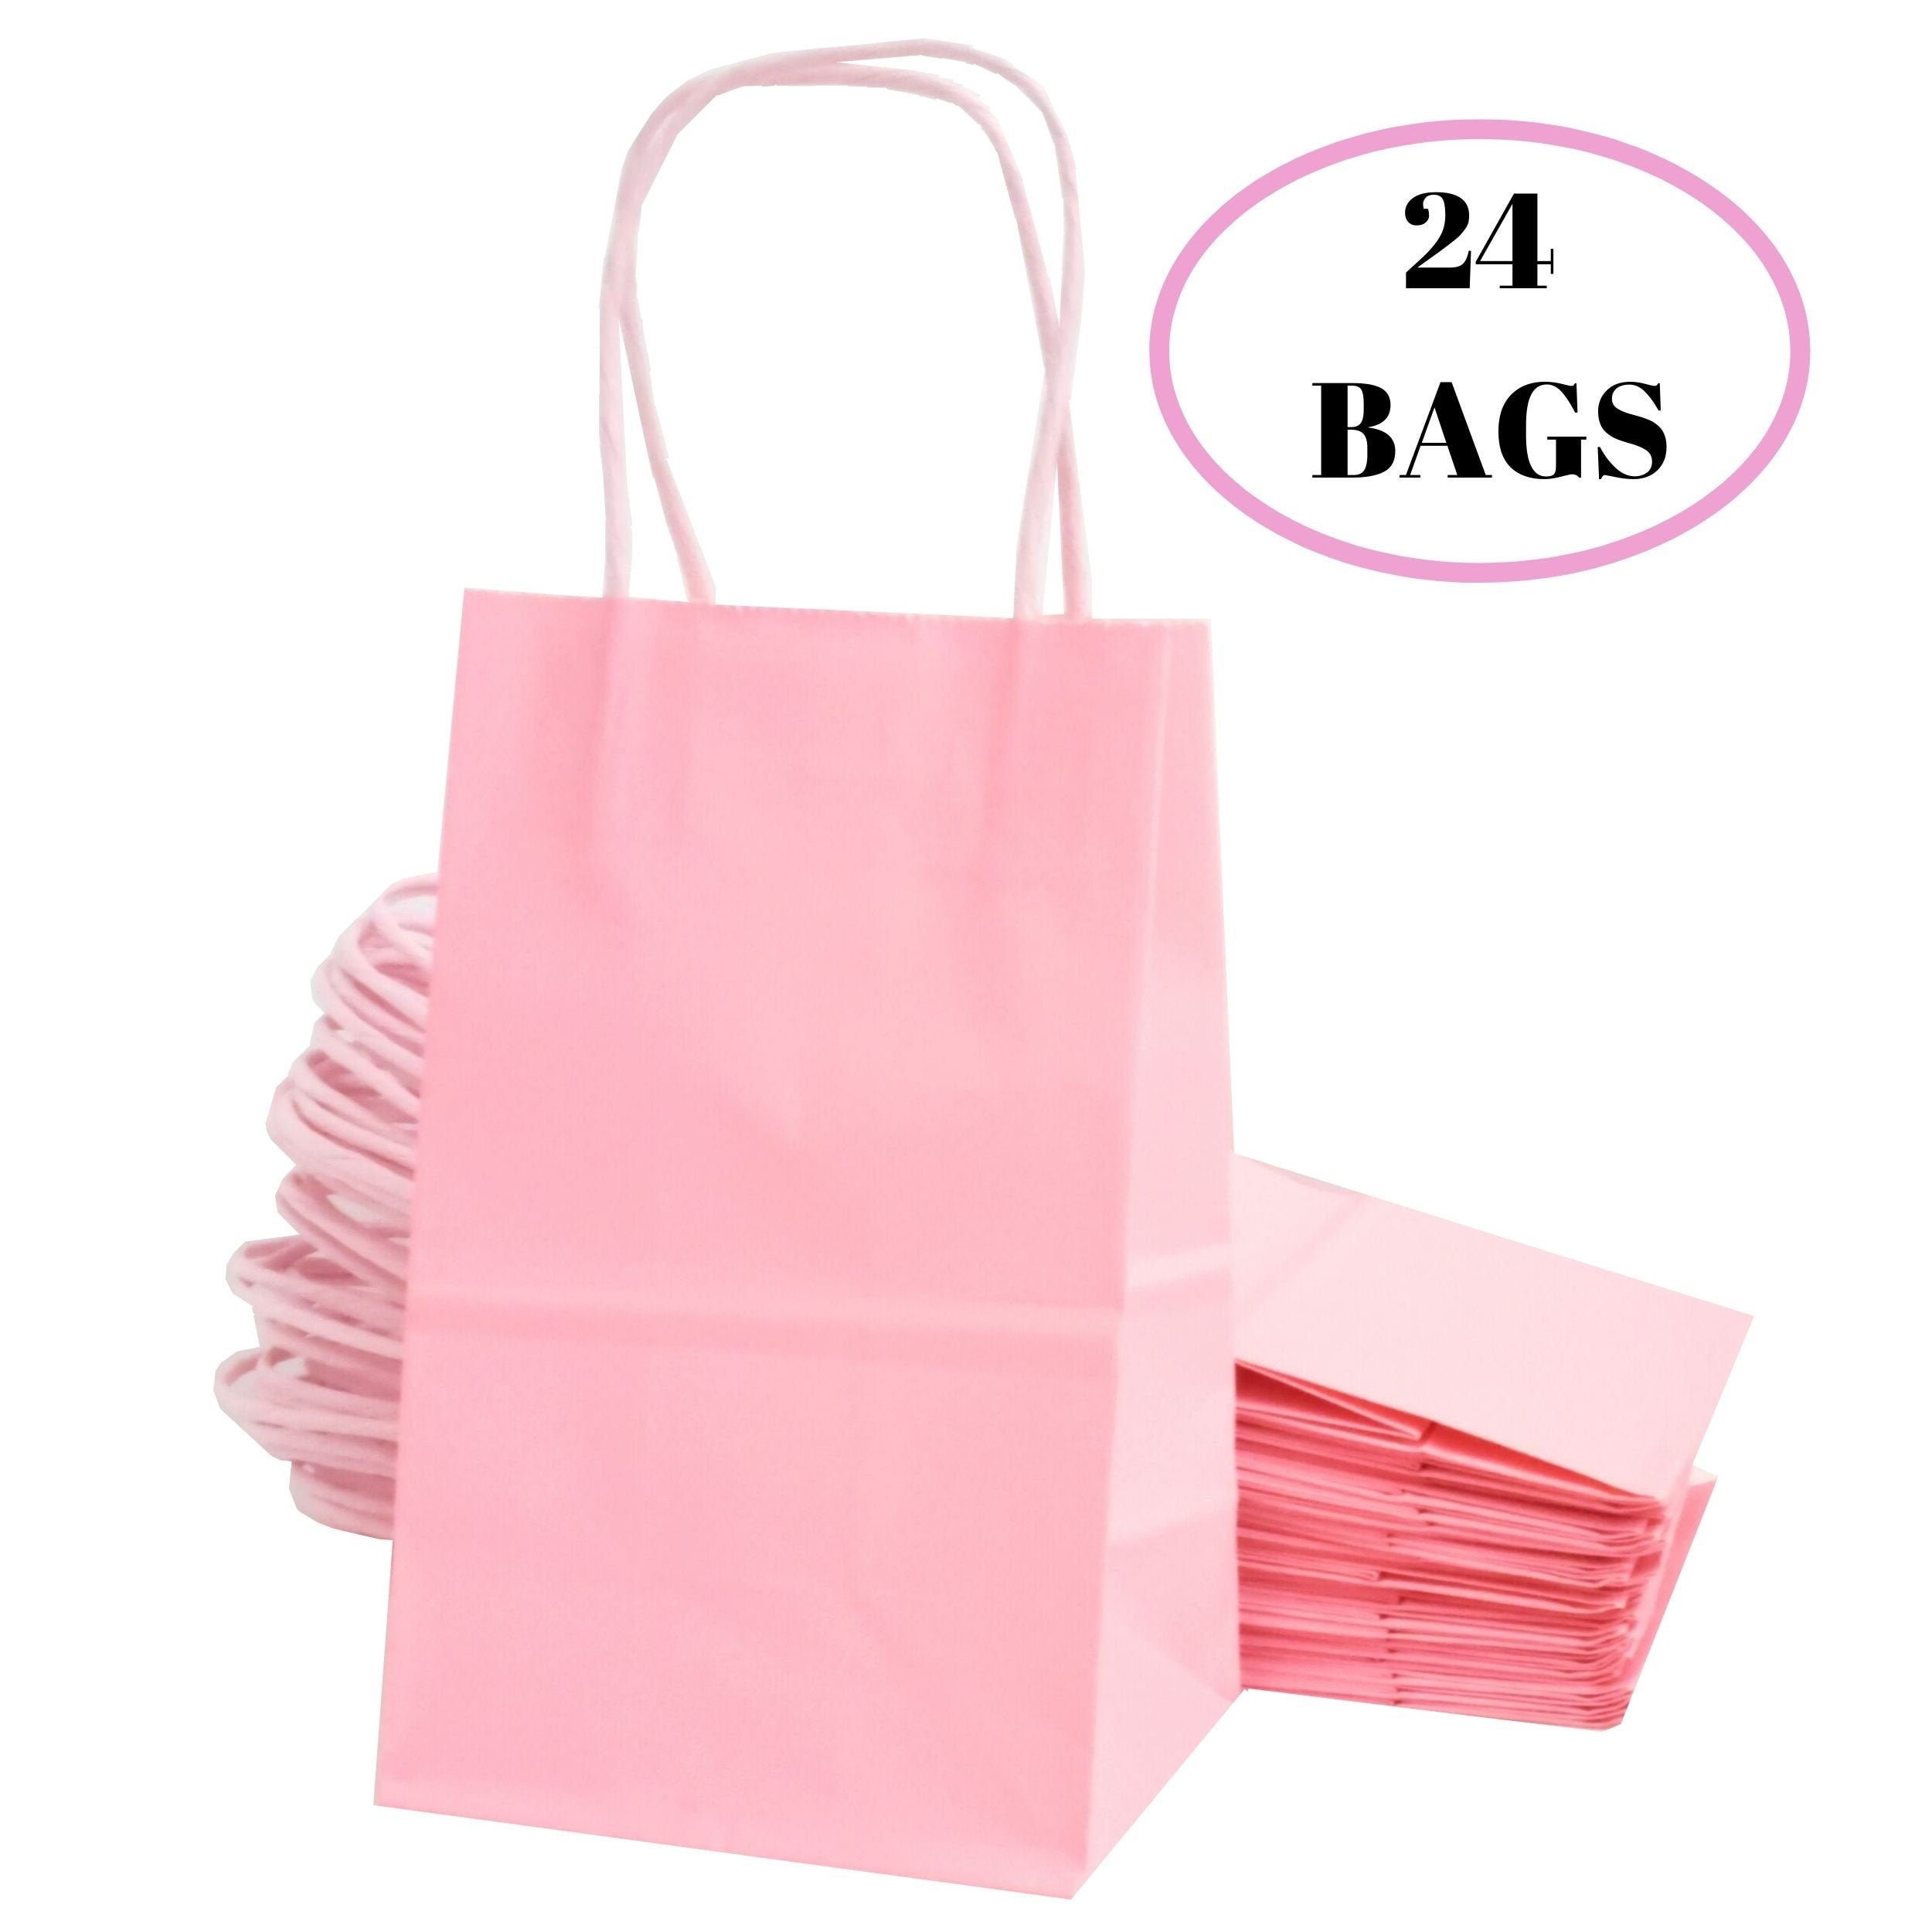 Gold Gift Bags with Handles, Small Gift Bag (9.25 x 8 x 4.25 in